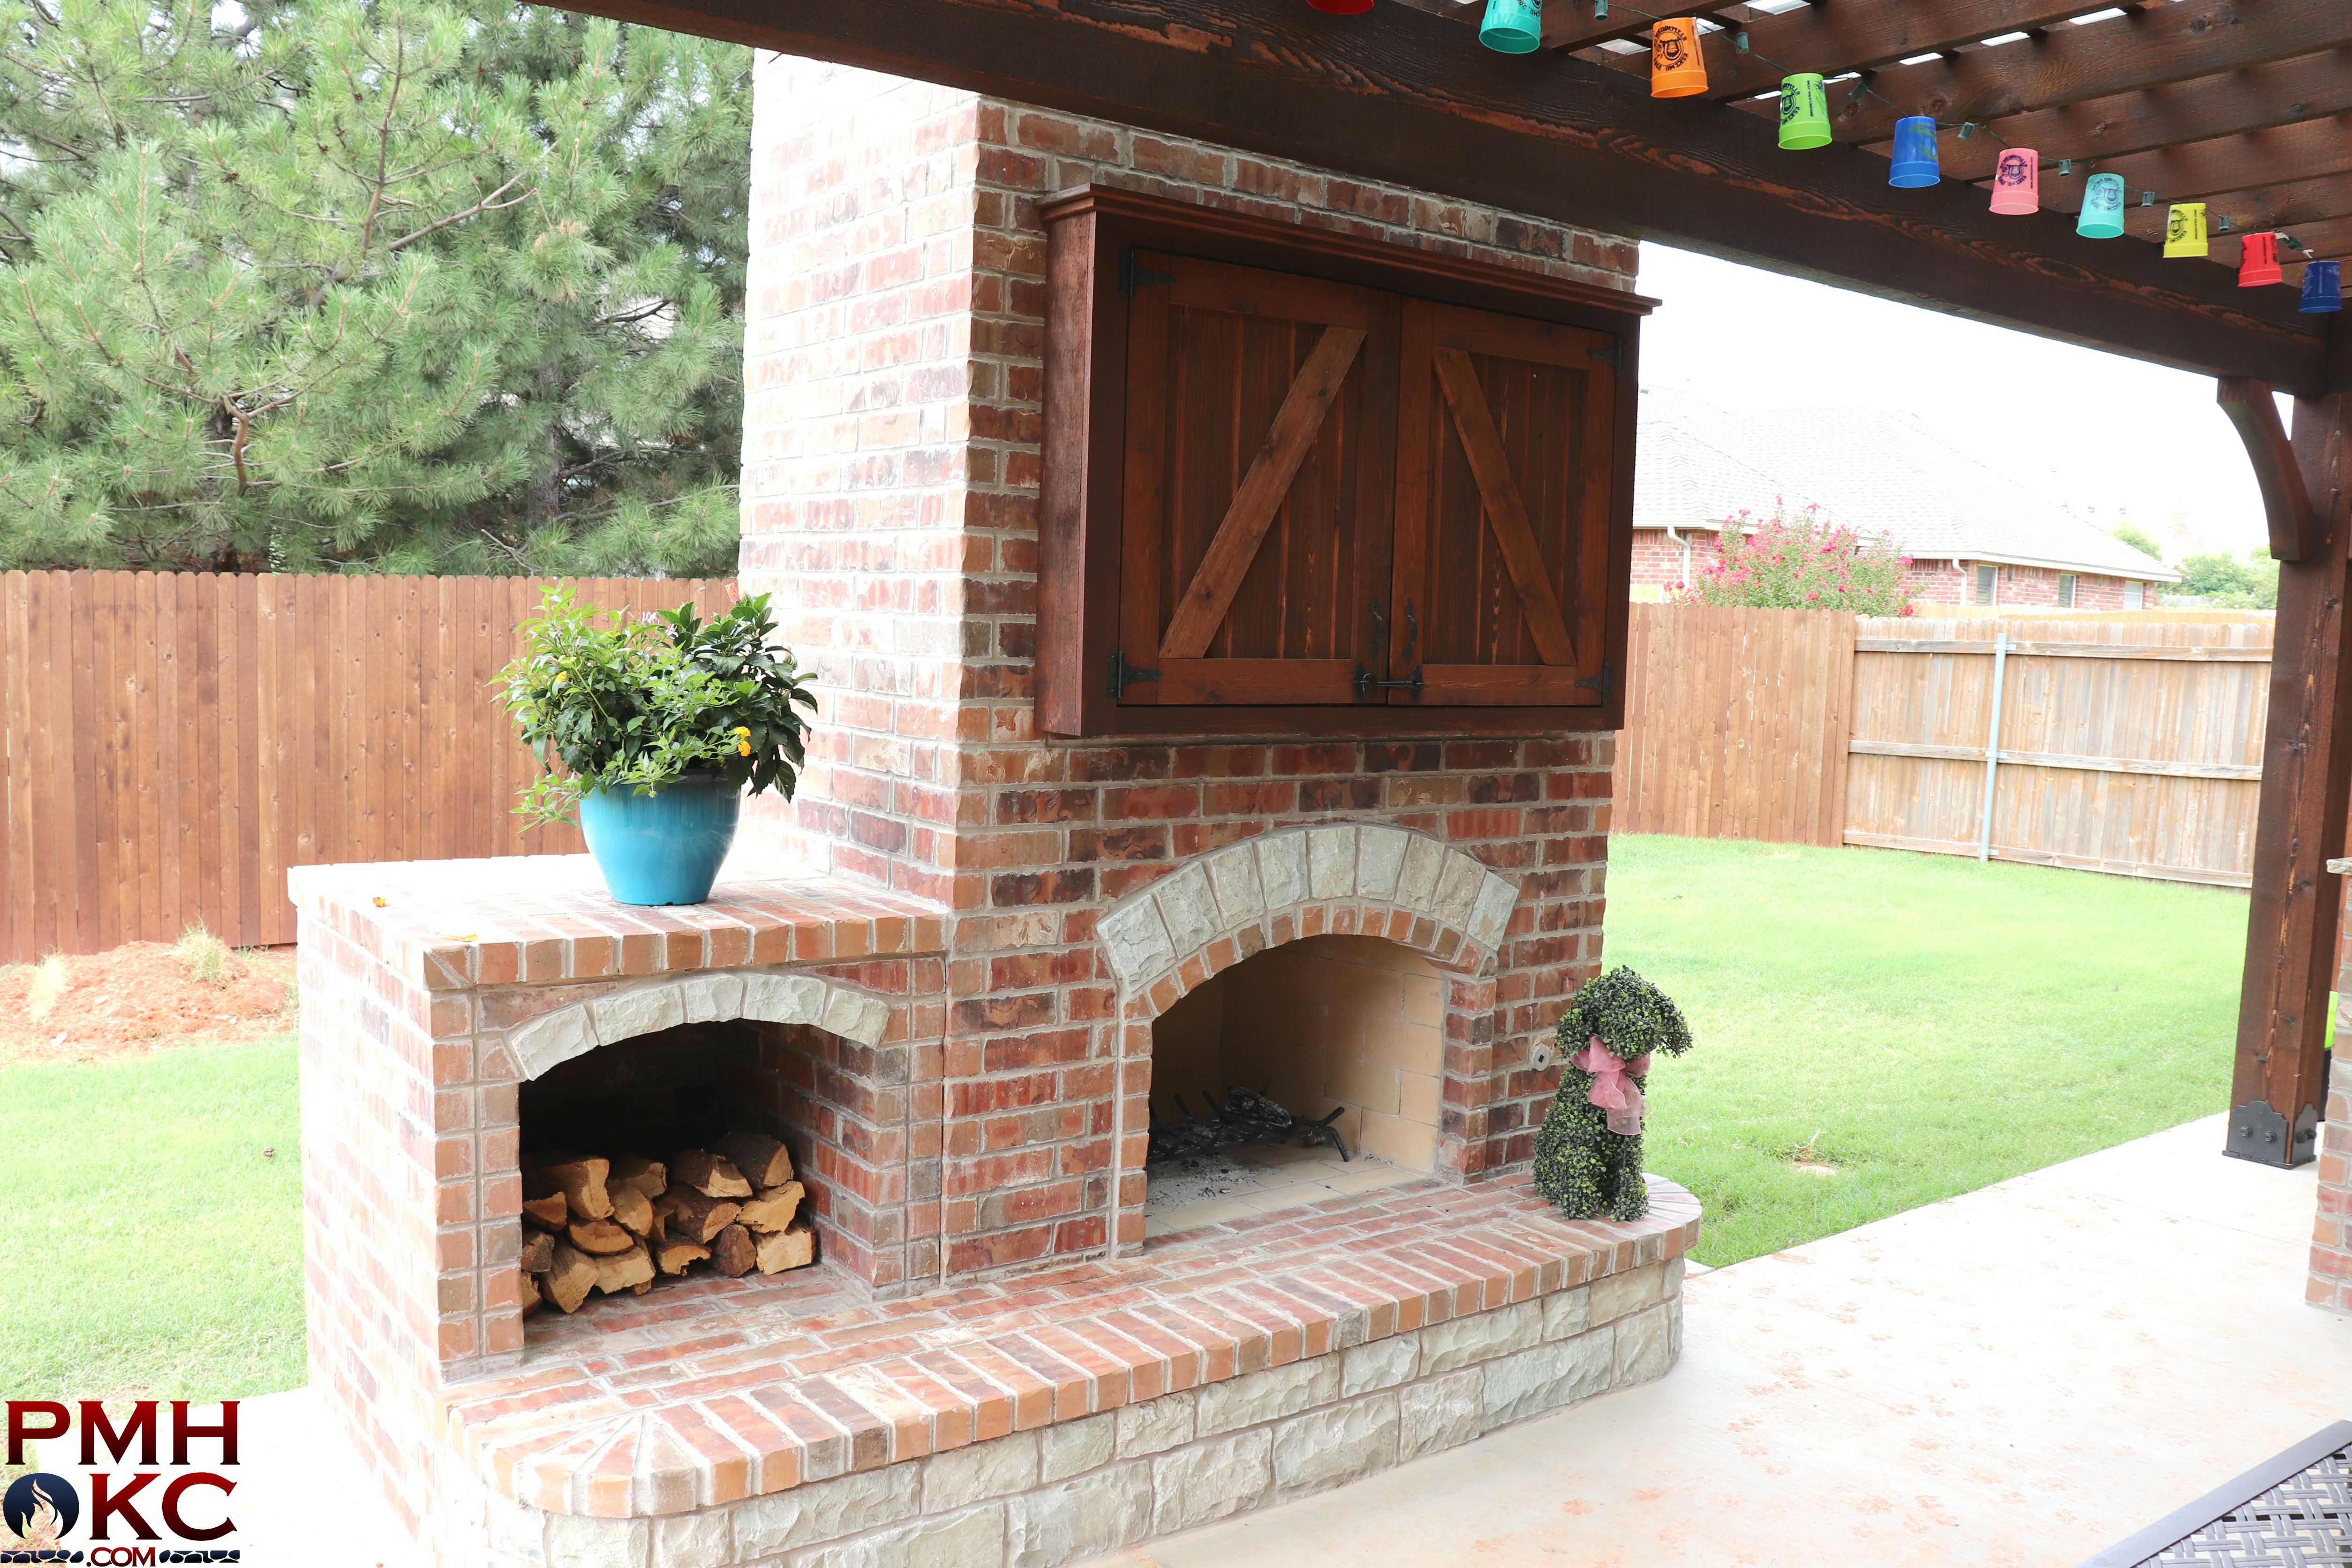 Fireplace Oven Beautiful Custom Made Brick Fireplace with A Firewood Holder and Tv